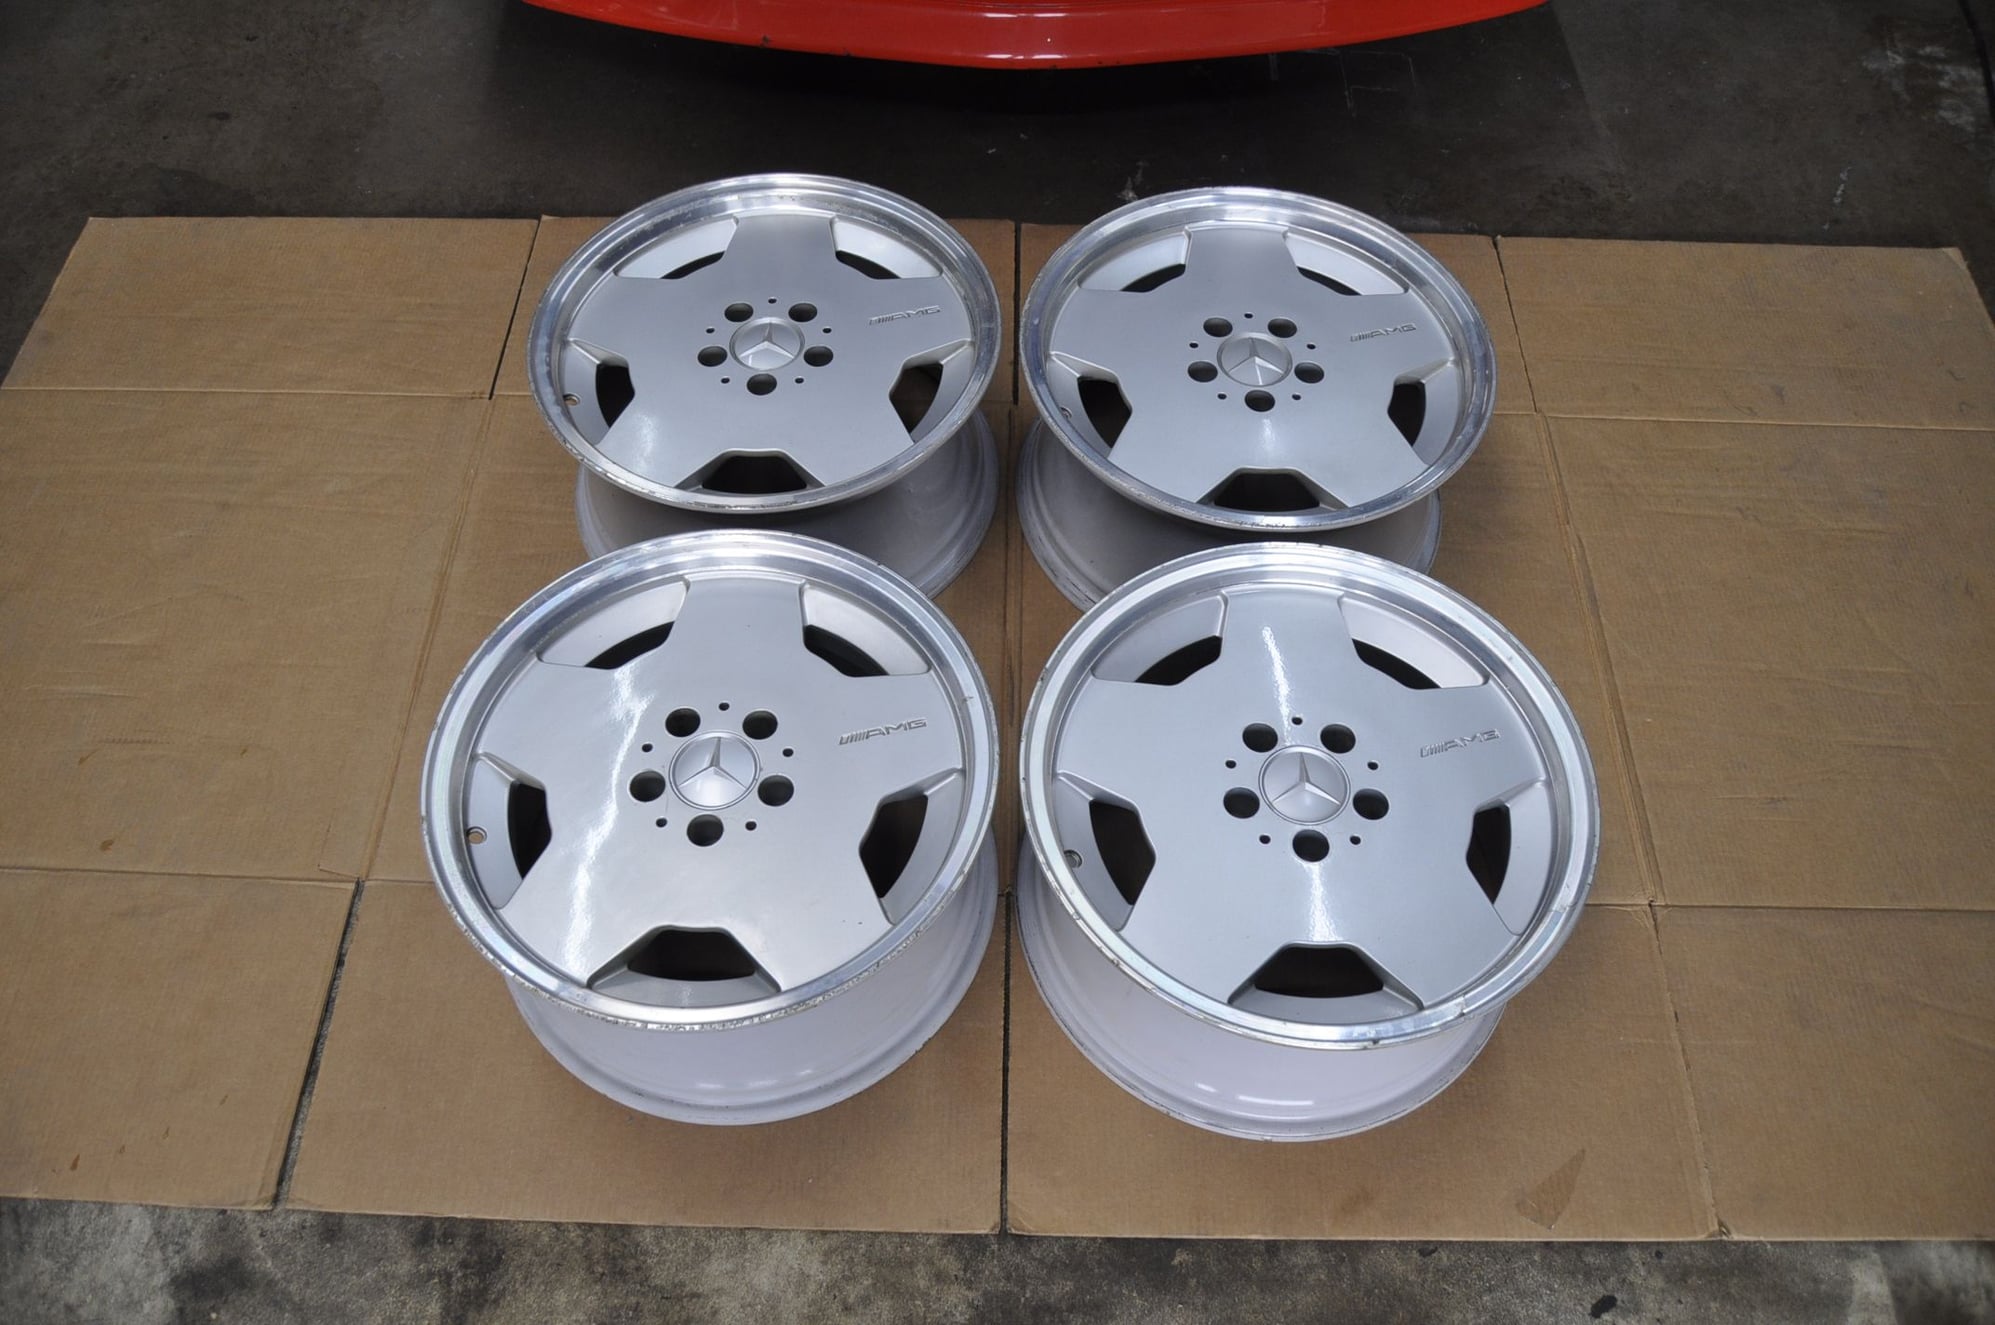 Wheels and Tires/Axles - AMG Aero 1 Monoblock 17x8 (post merger) - Used - All Years Mercedes-Benz All Models - Plano, TX 75093, United States